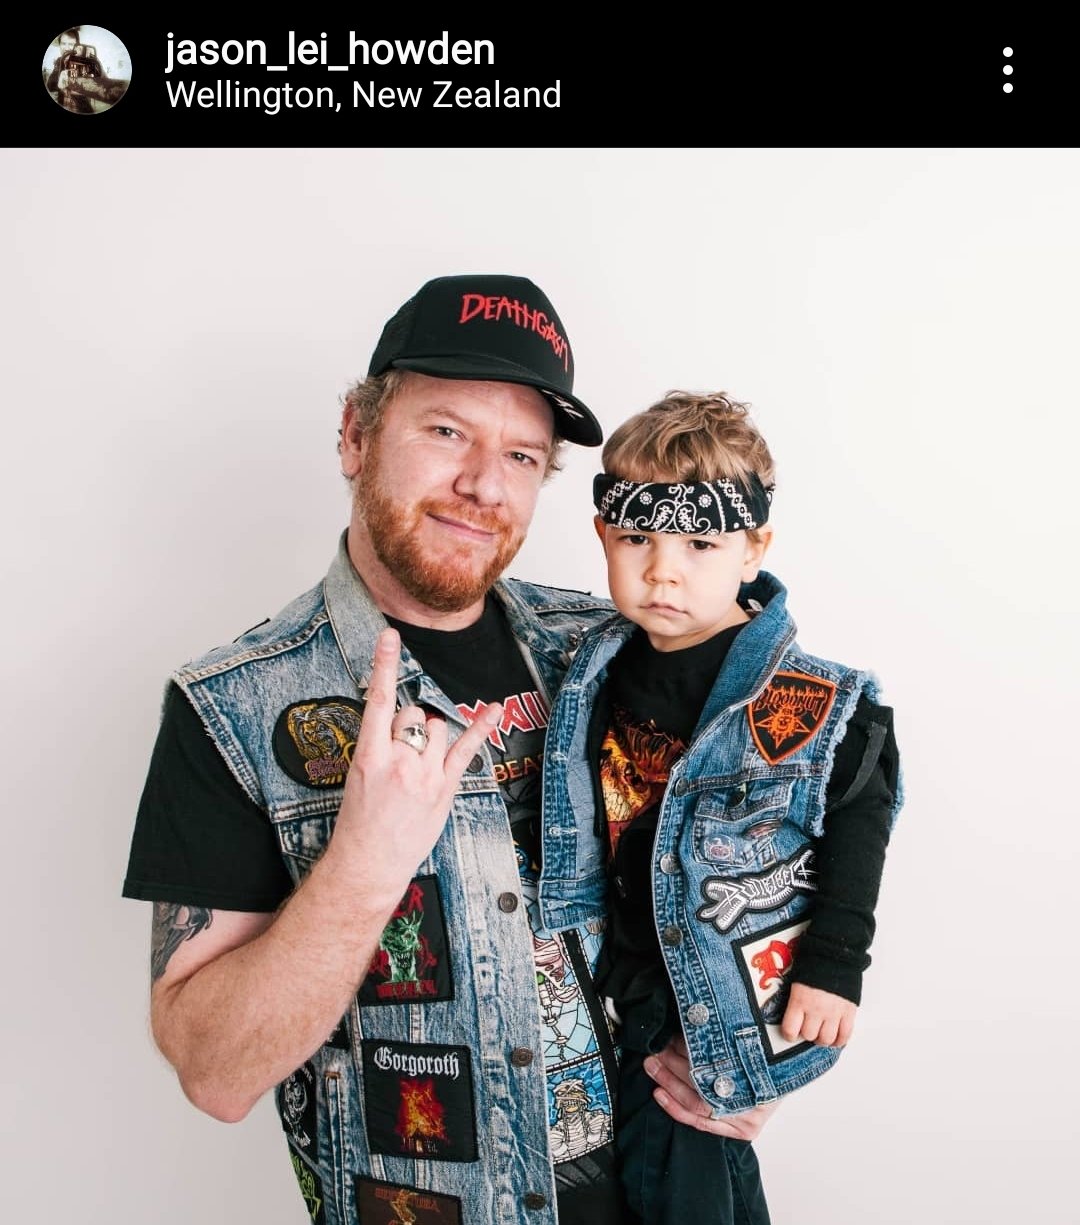 BLOODNUT on Twitter: "This is Jason Lei Howden (Director of Deathgasm &amp; Guns Akimbo) and his boy in their matching metal attire. His boy in particular has impeccable taste *coughs* https://t.co/aGGepEp17i" /